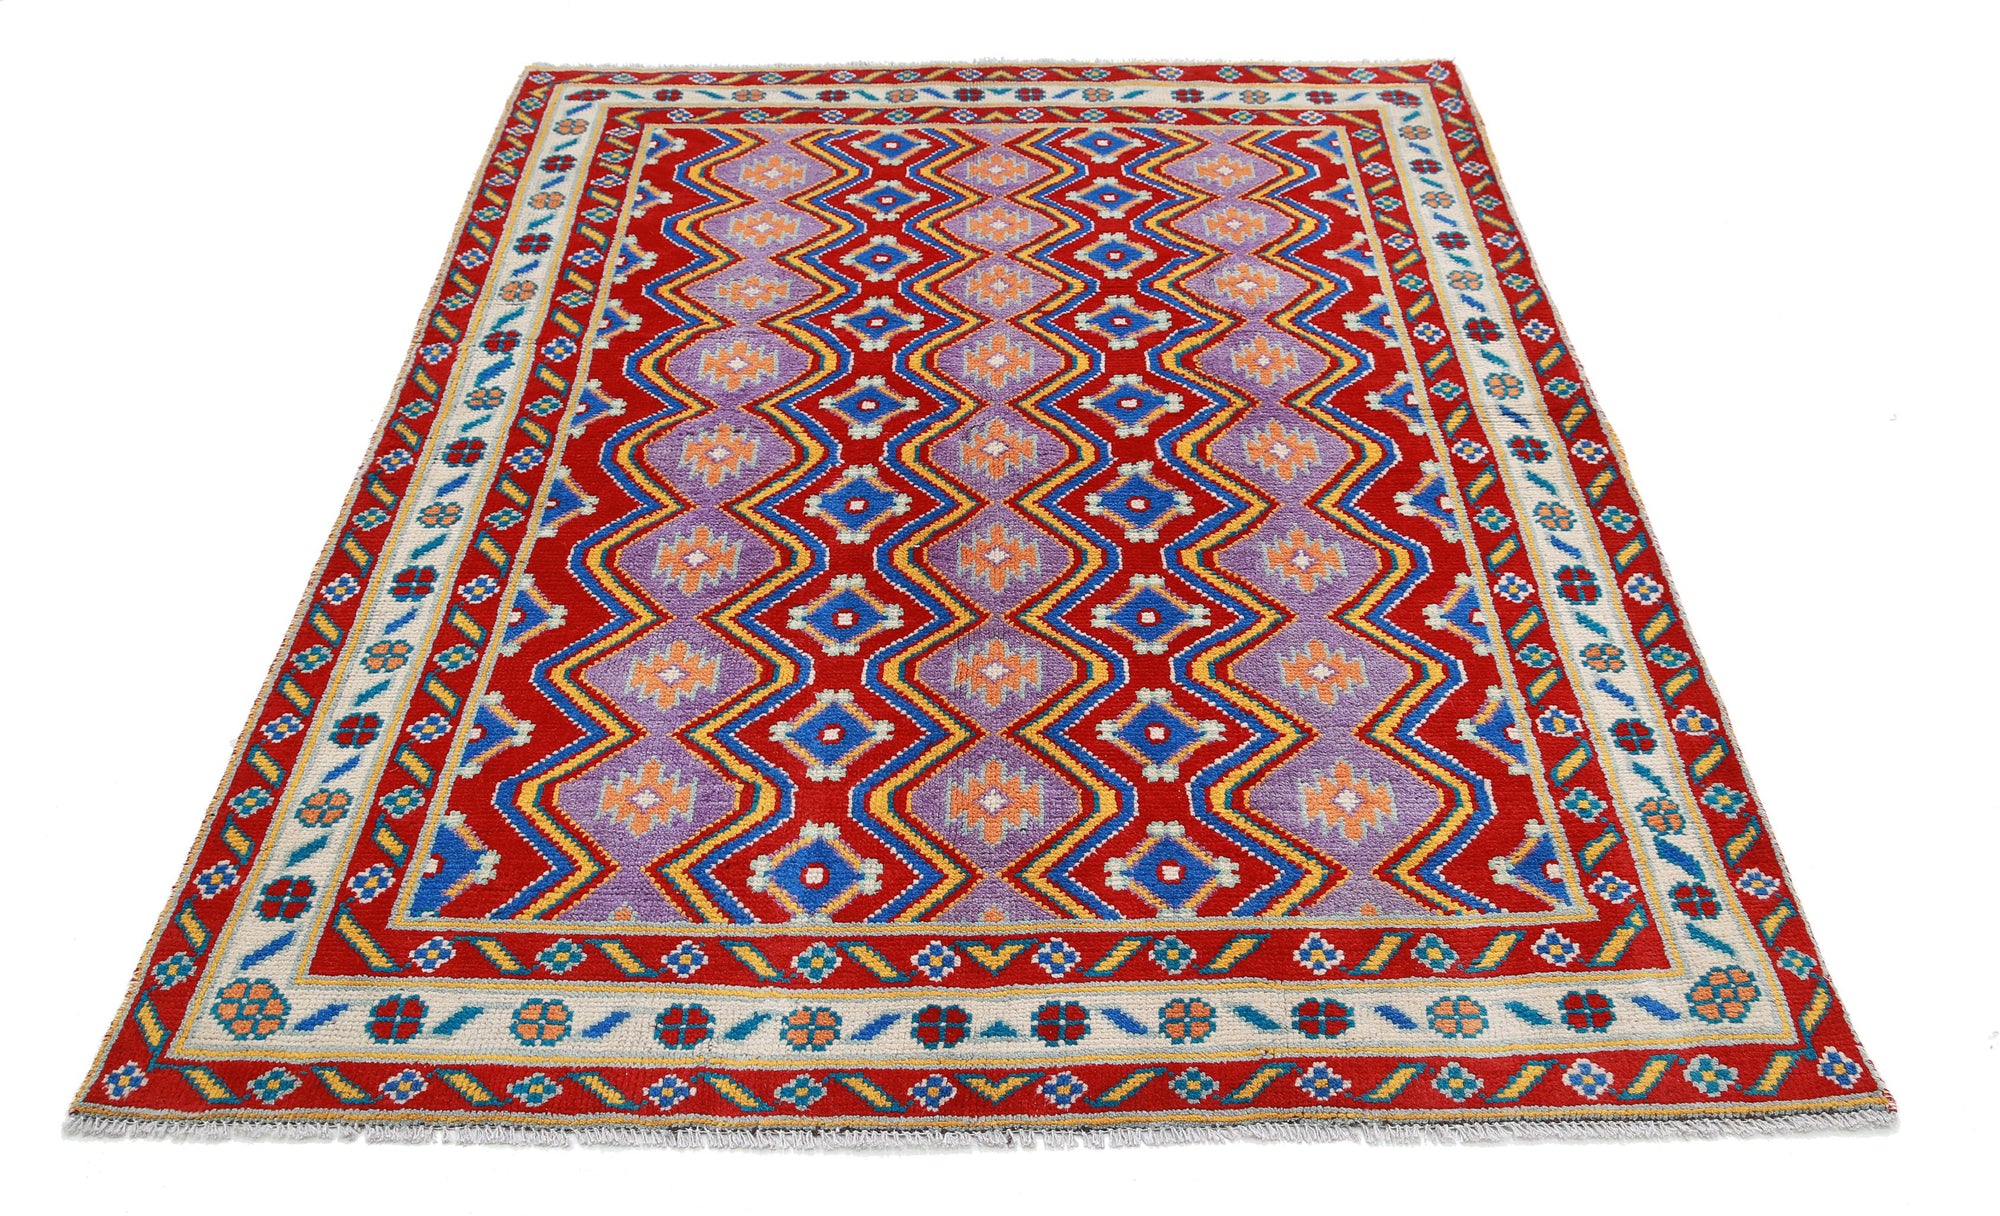 Revival-hand-knotted-qarghani-wool-rug-5014215-3.jpg